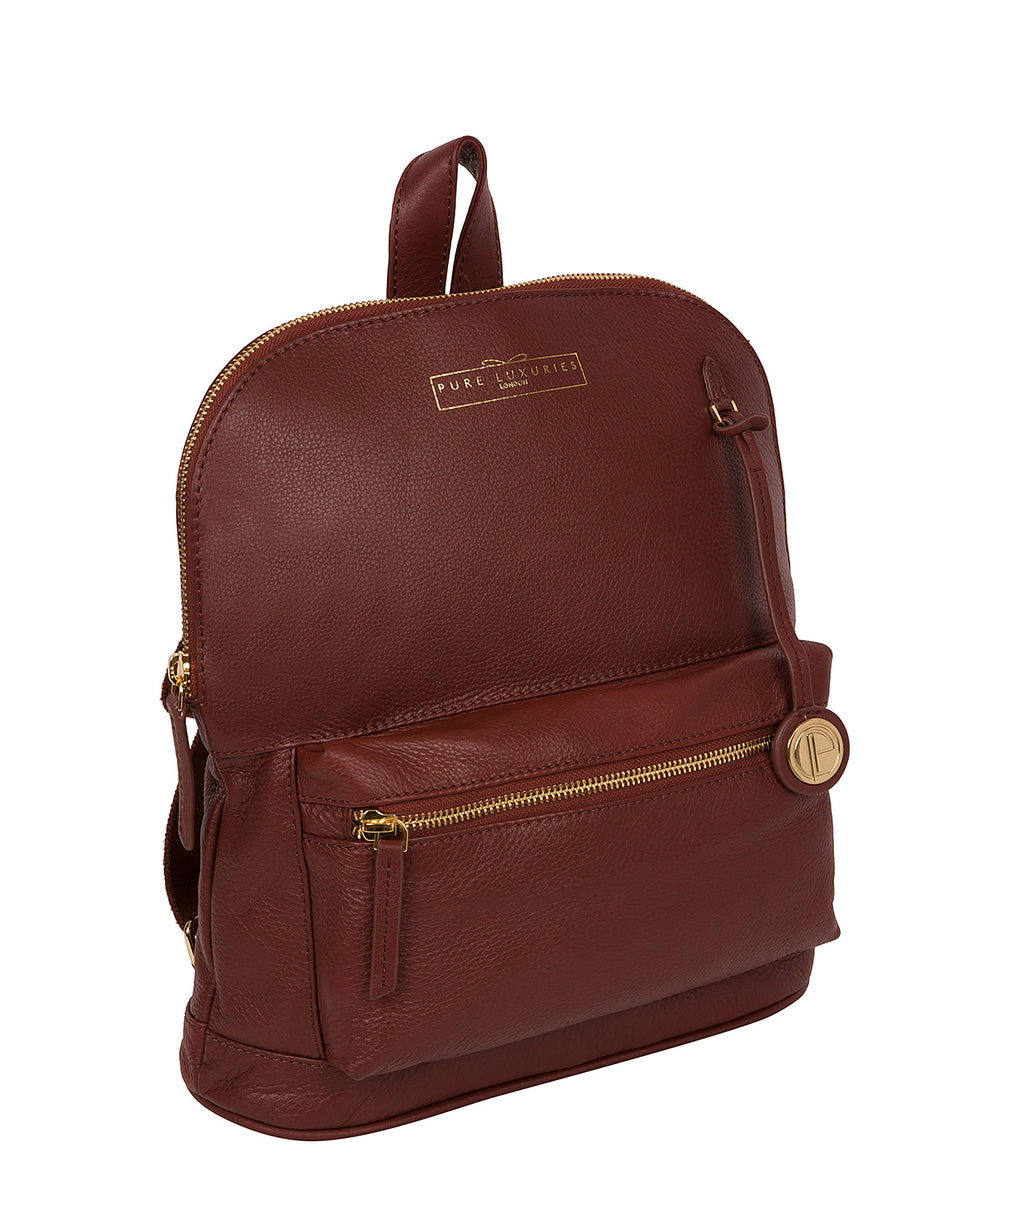 Chestnut Leather Backpack 'Kinsely' by Pure Luxuries – Pure Luxuries London